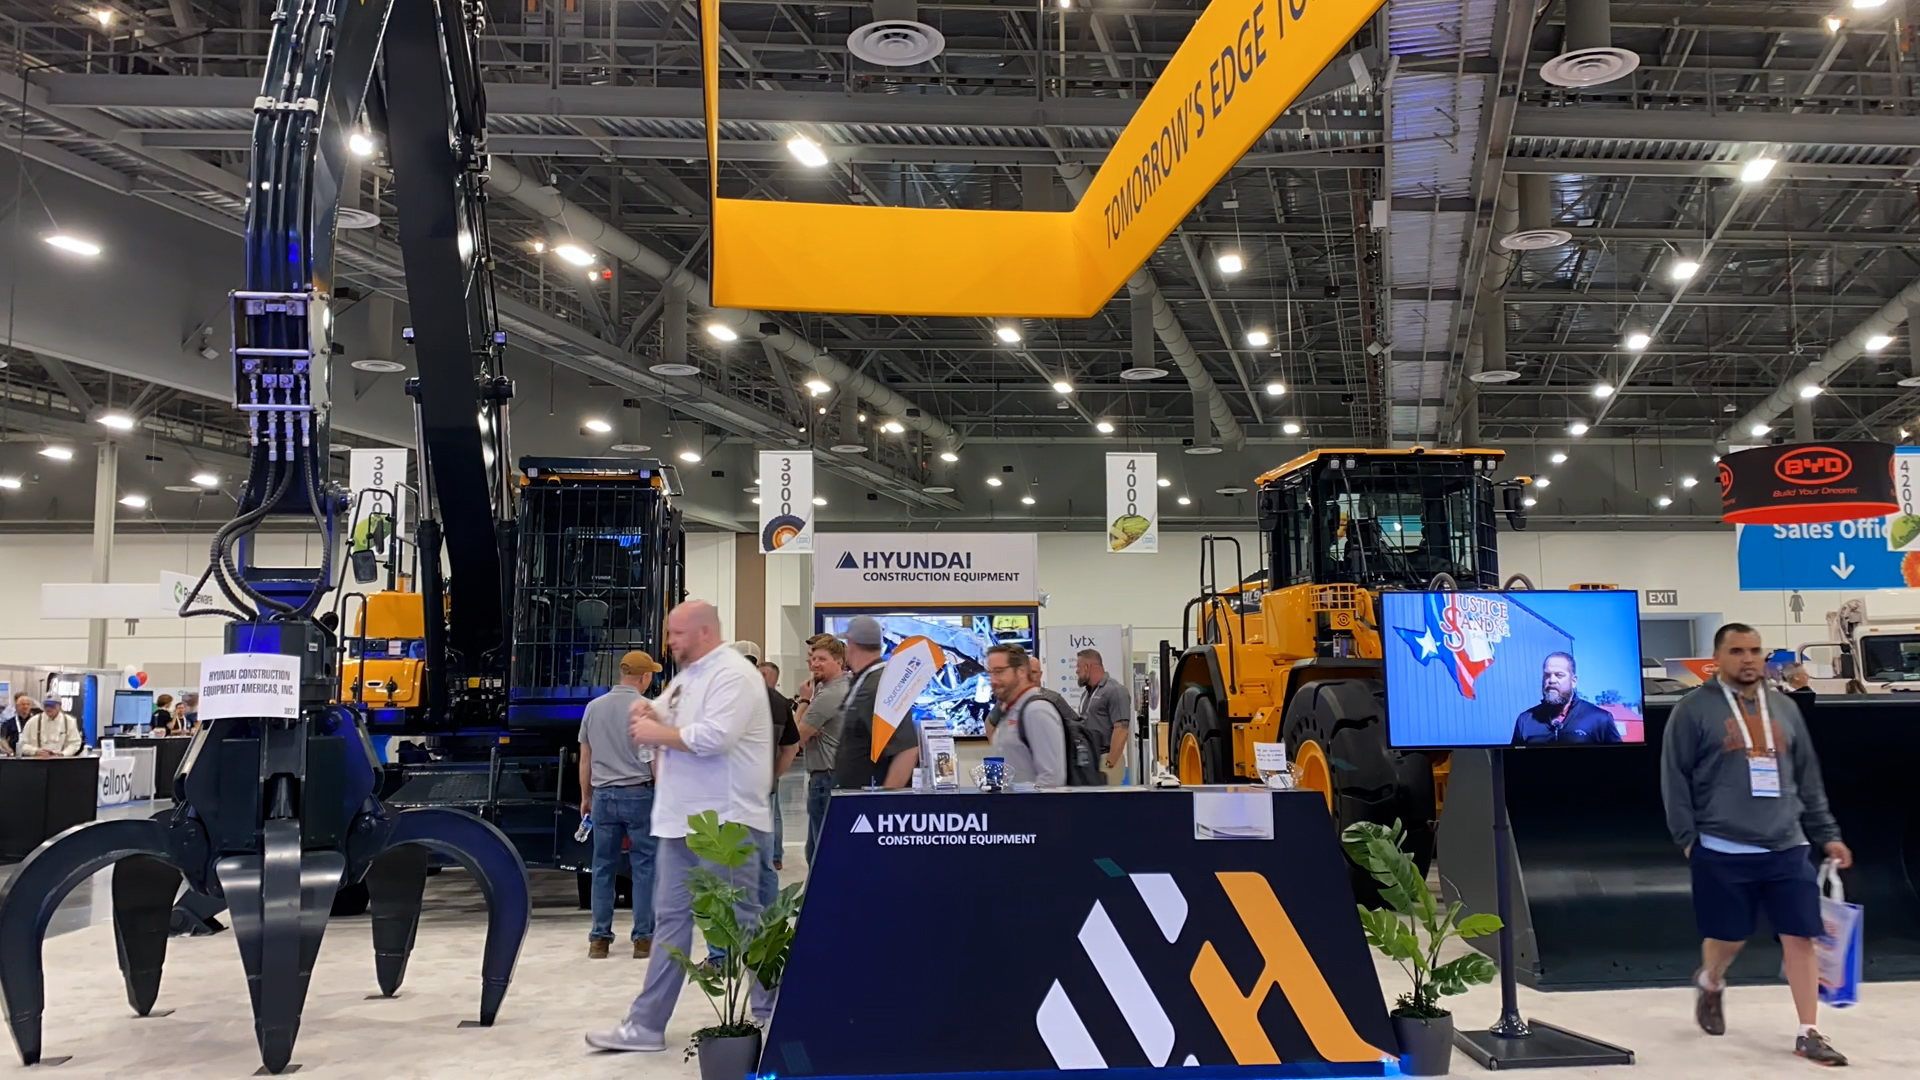 Hyundai Construction Equipment Attends Waste Expo in Las Vegas, NV, May 10th-12th